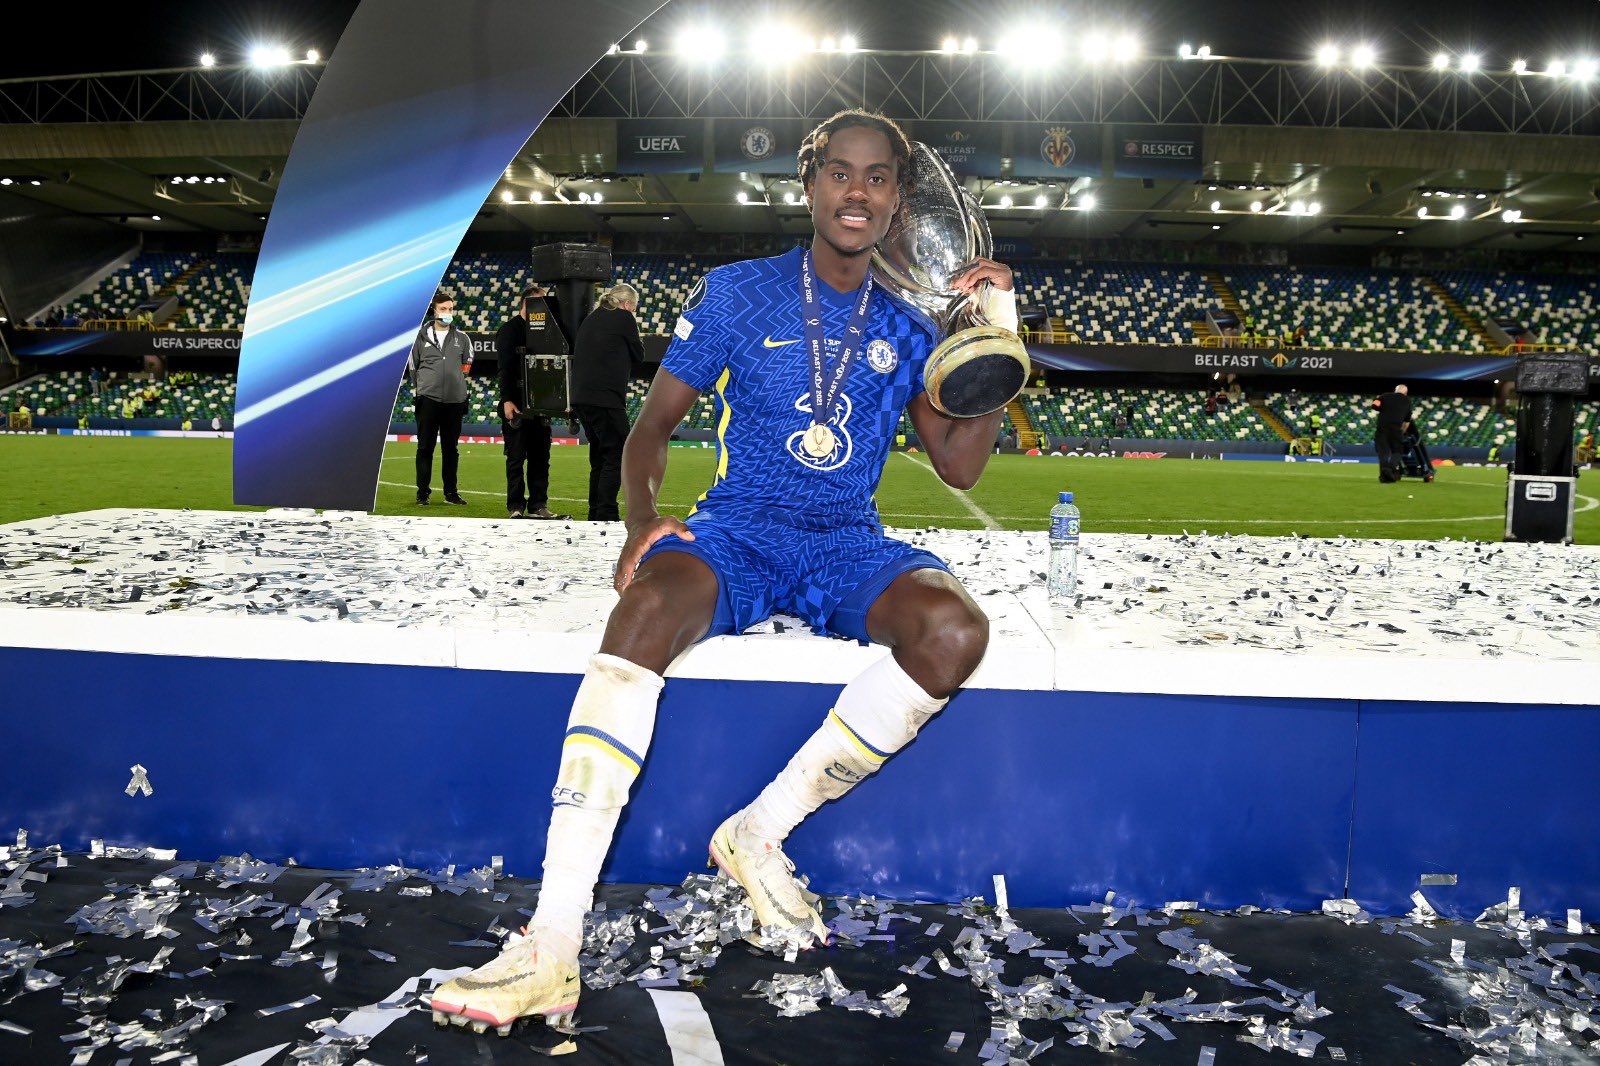 Trevoh Chalobah on Twitter: "The greatest patience is humility, stay hungry  🙏🏆 #SuperCup #CFC… "